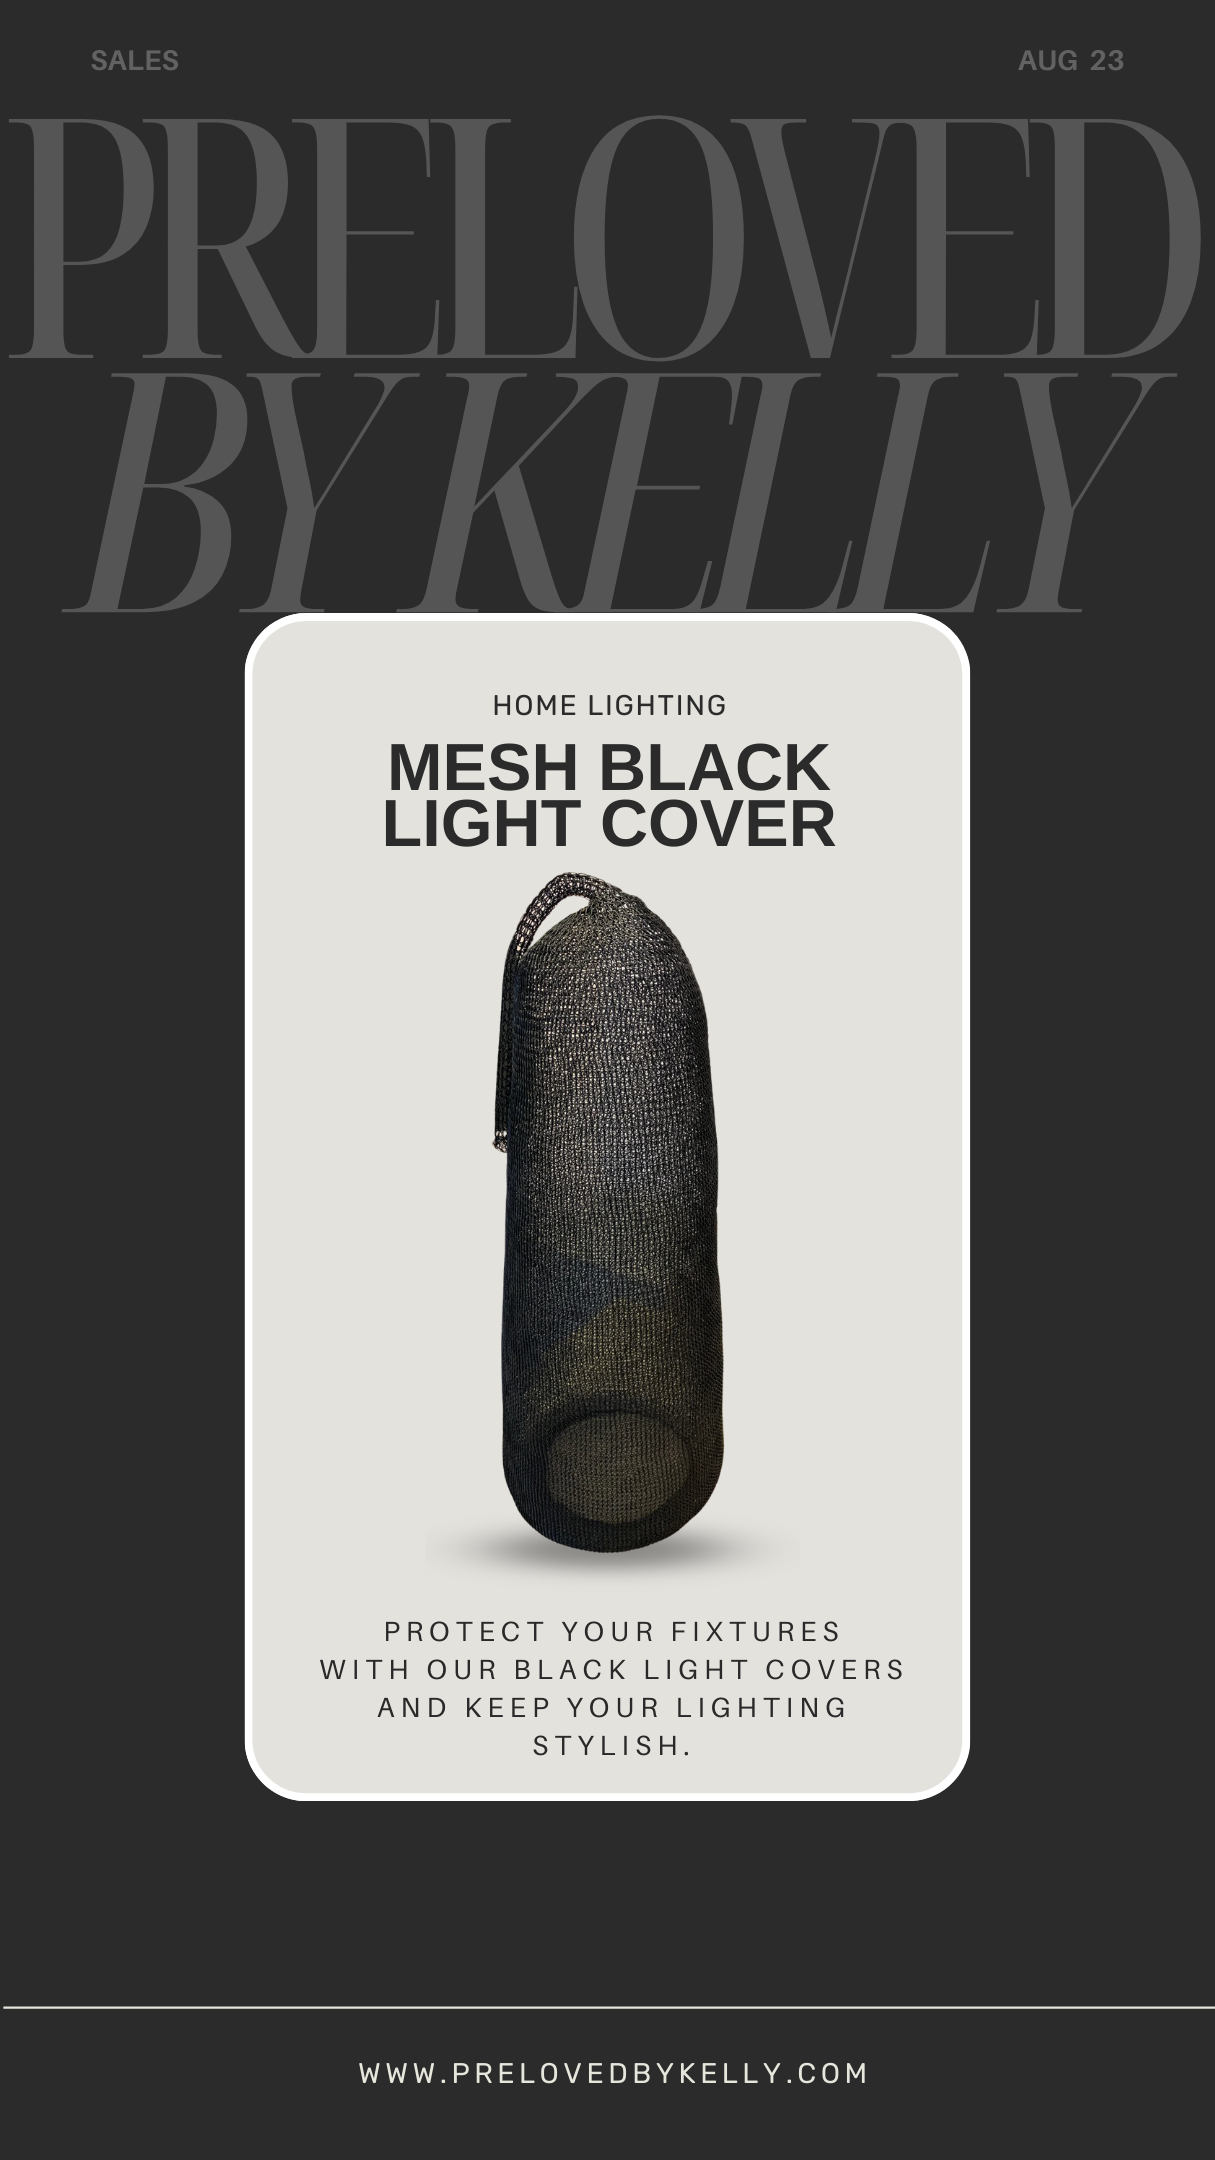 Mesh Black Light Covers - Bulb Cover Shades for Industrial, Outdoor, Event & Home Lighting